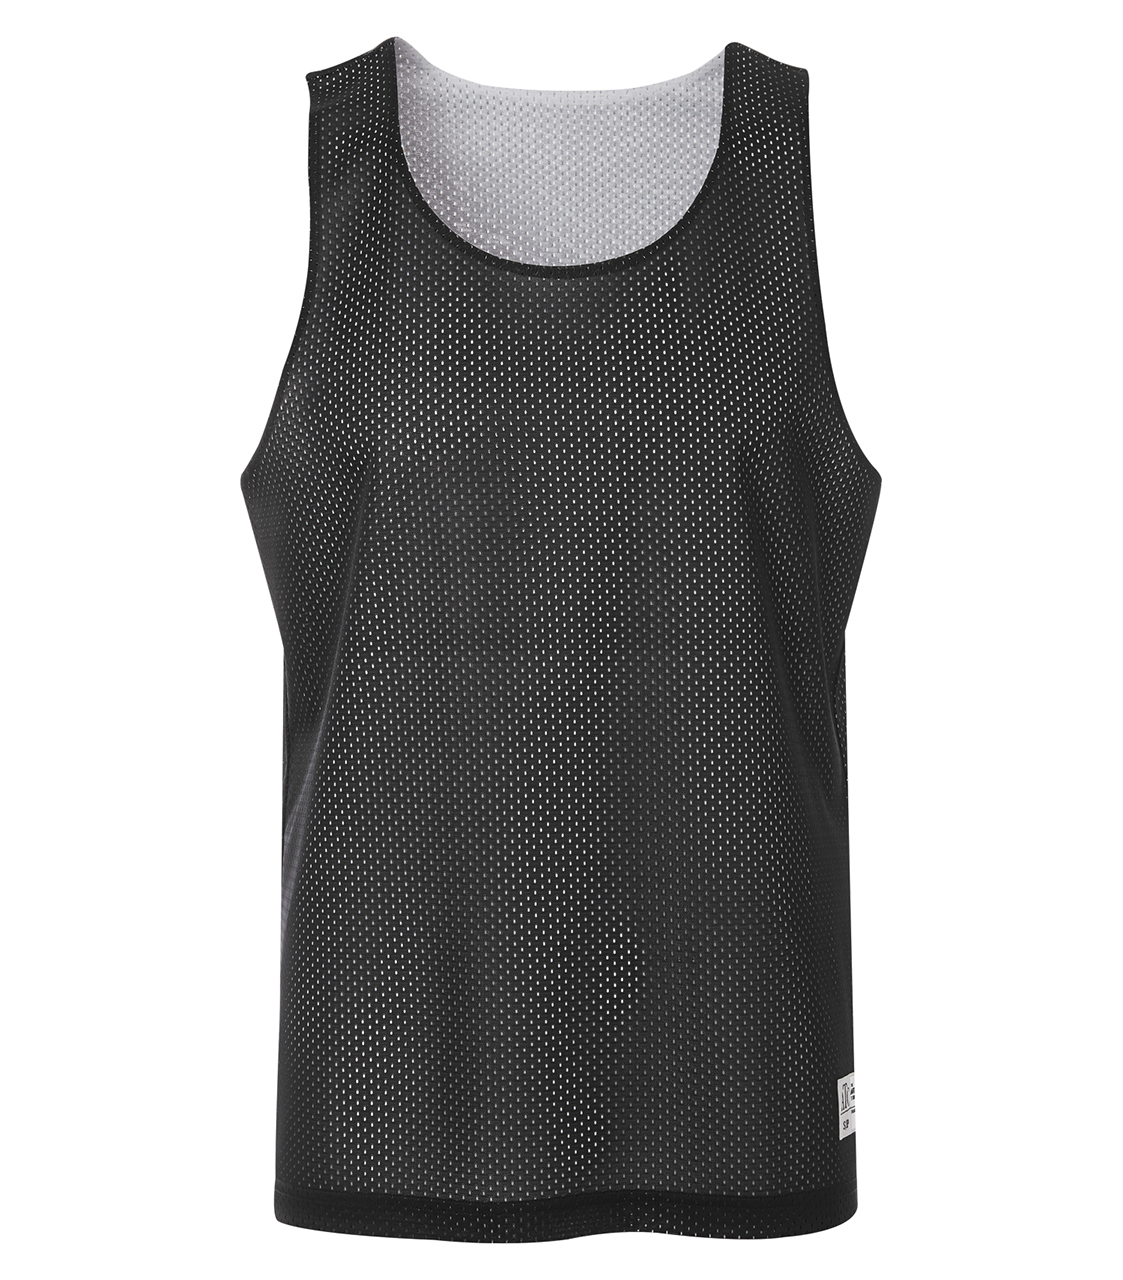 Picture of ATC Pro Mesh Reversible Tank Top